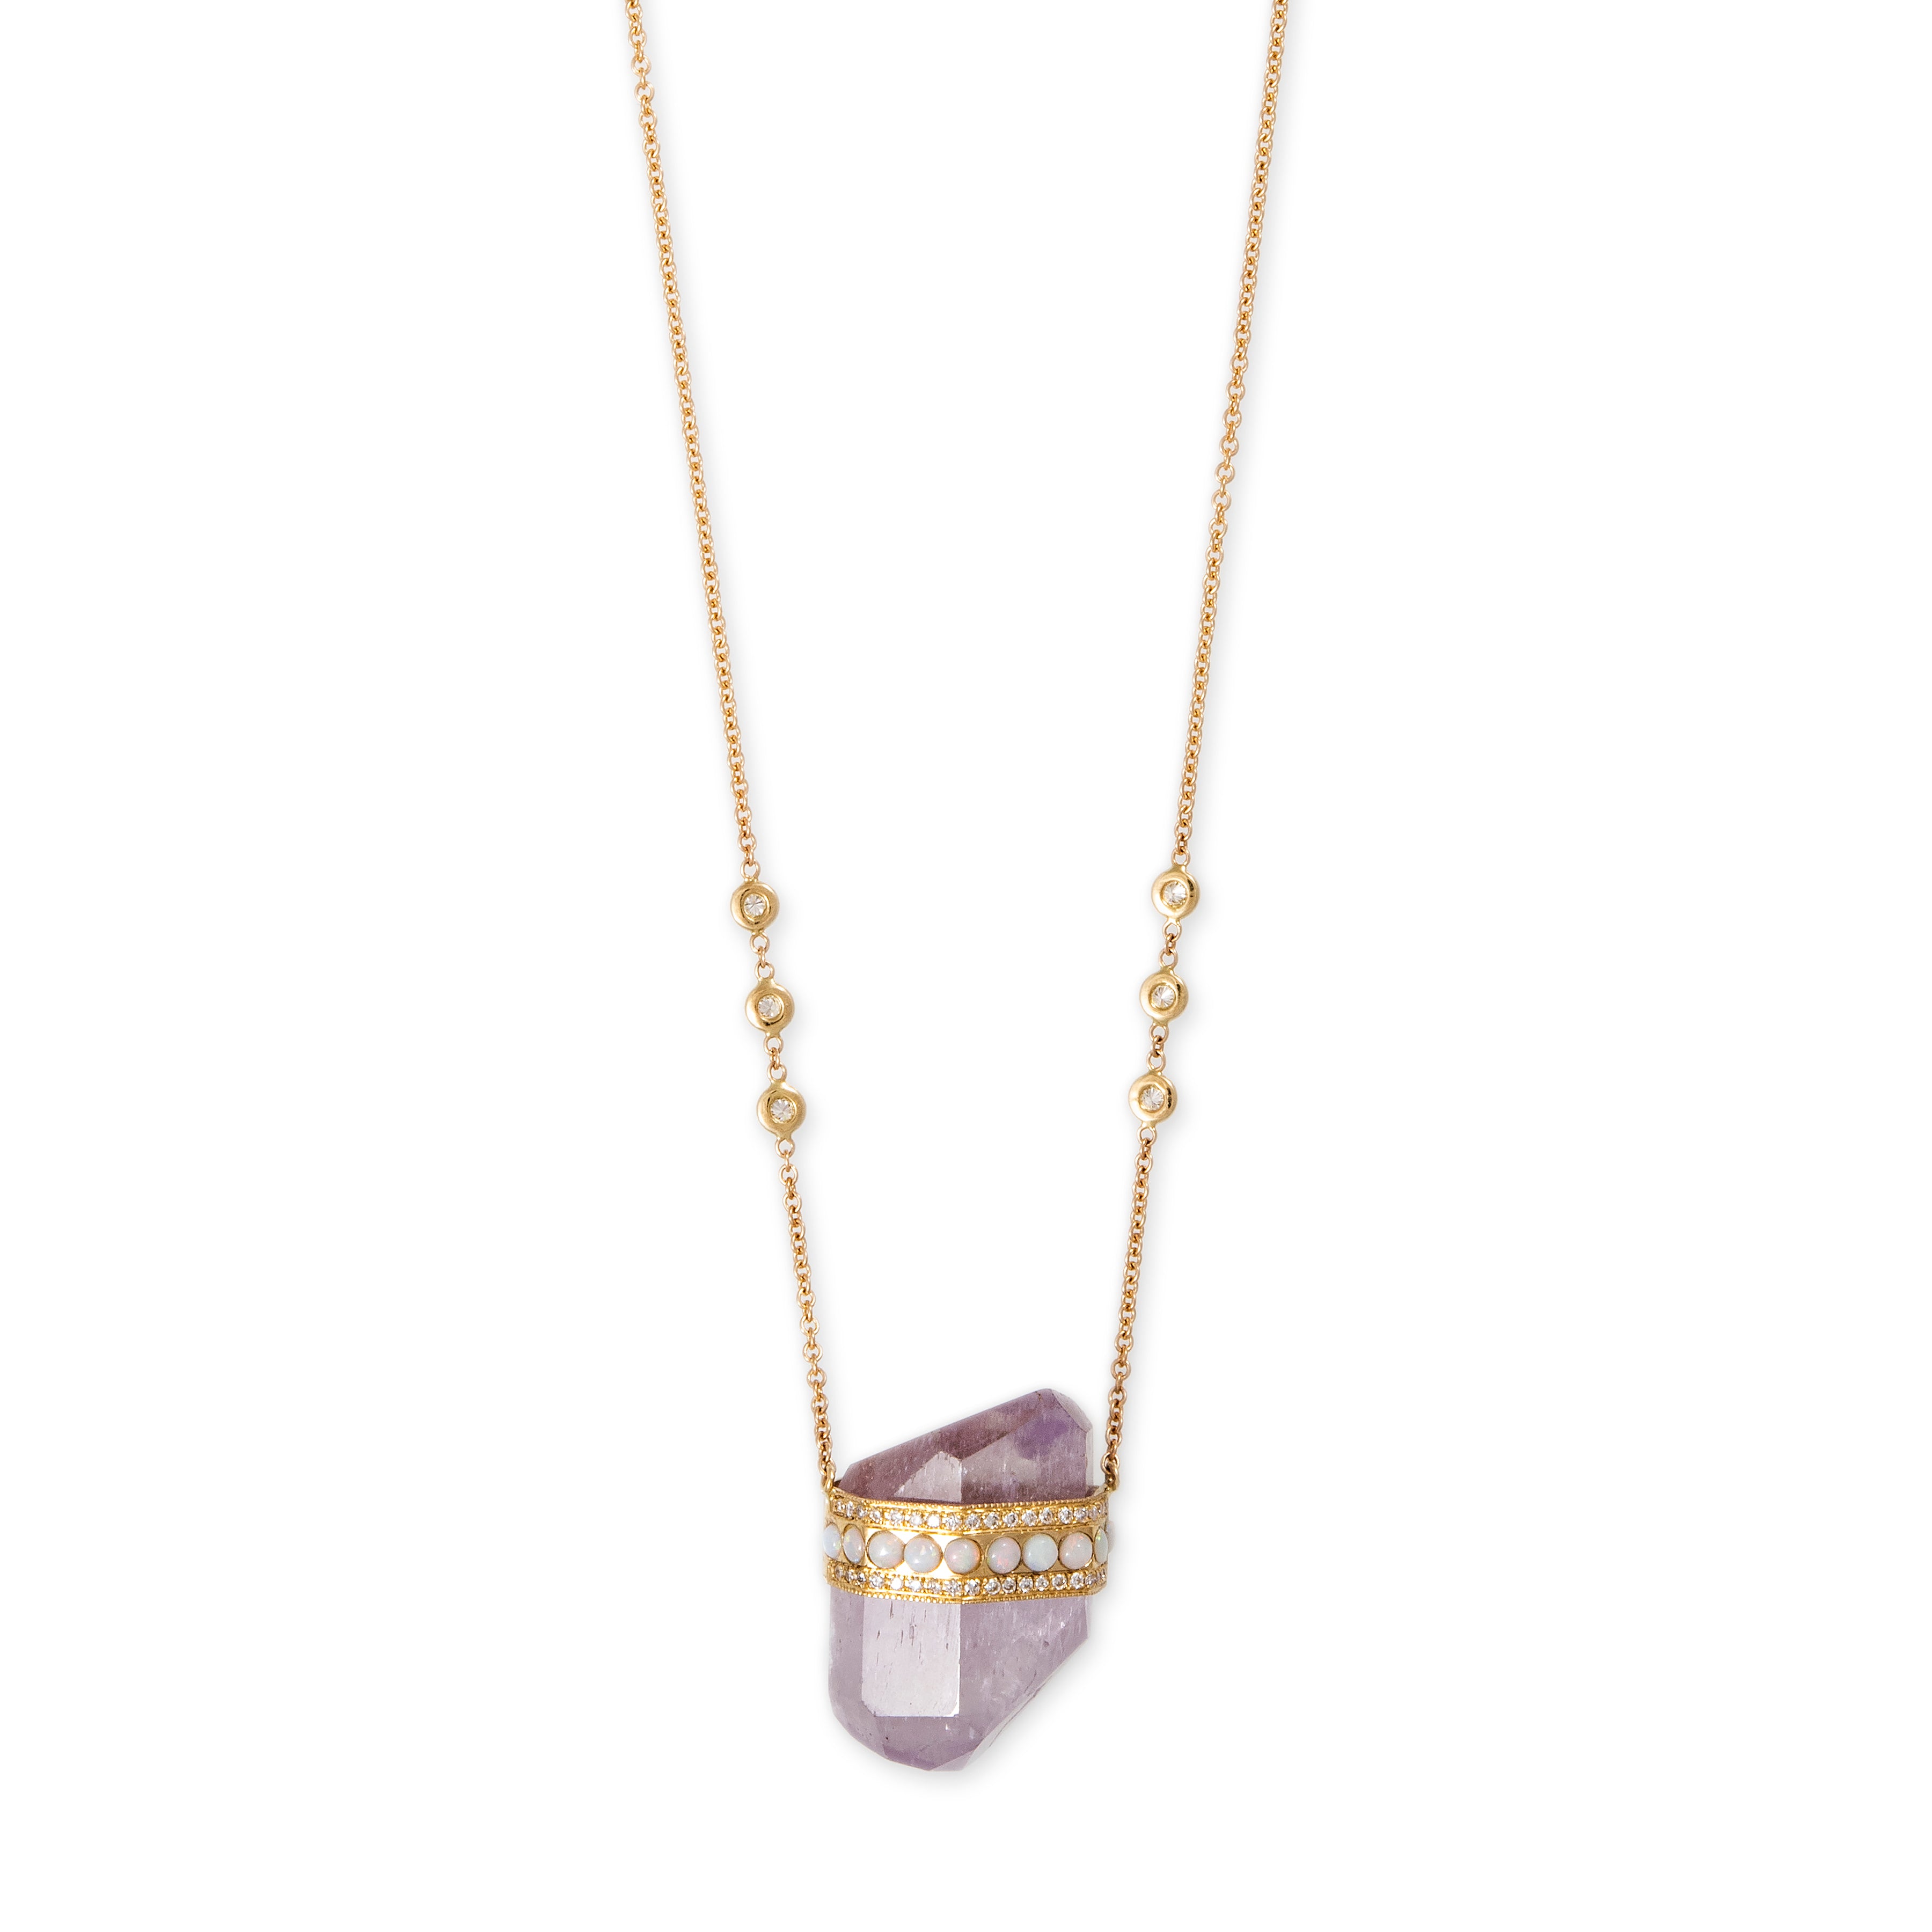 PAVE 10 ROUND OPAL CAP + AMETHYST CRYSTAL NECKLACE